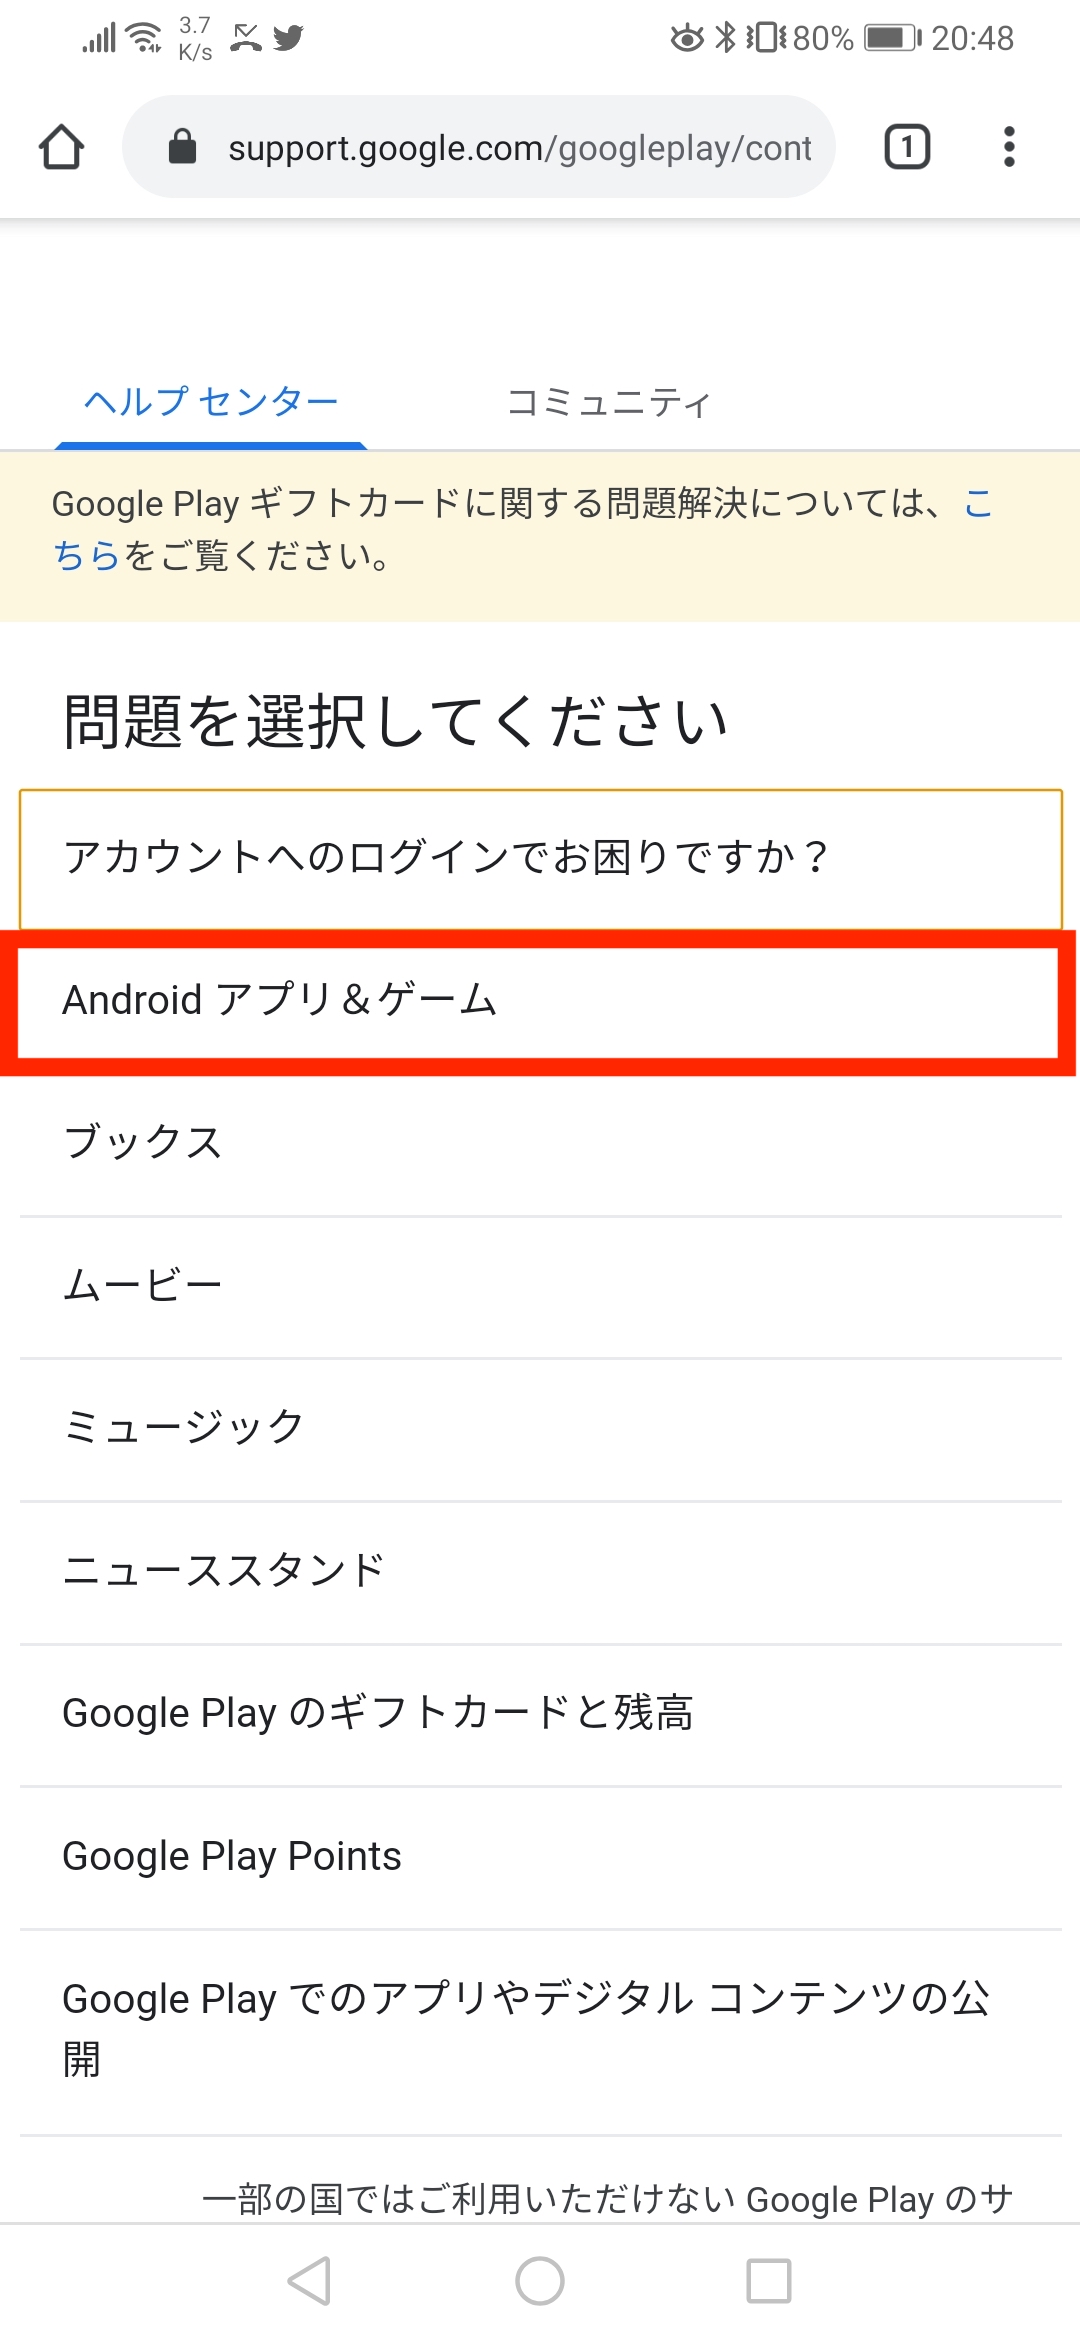 「Androidアプリ＆ゲーム」を選択